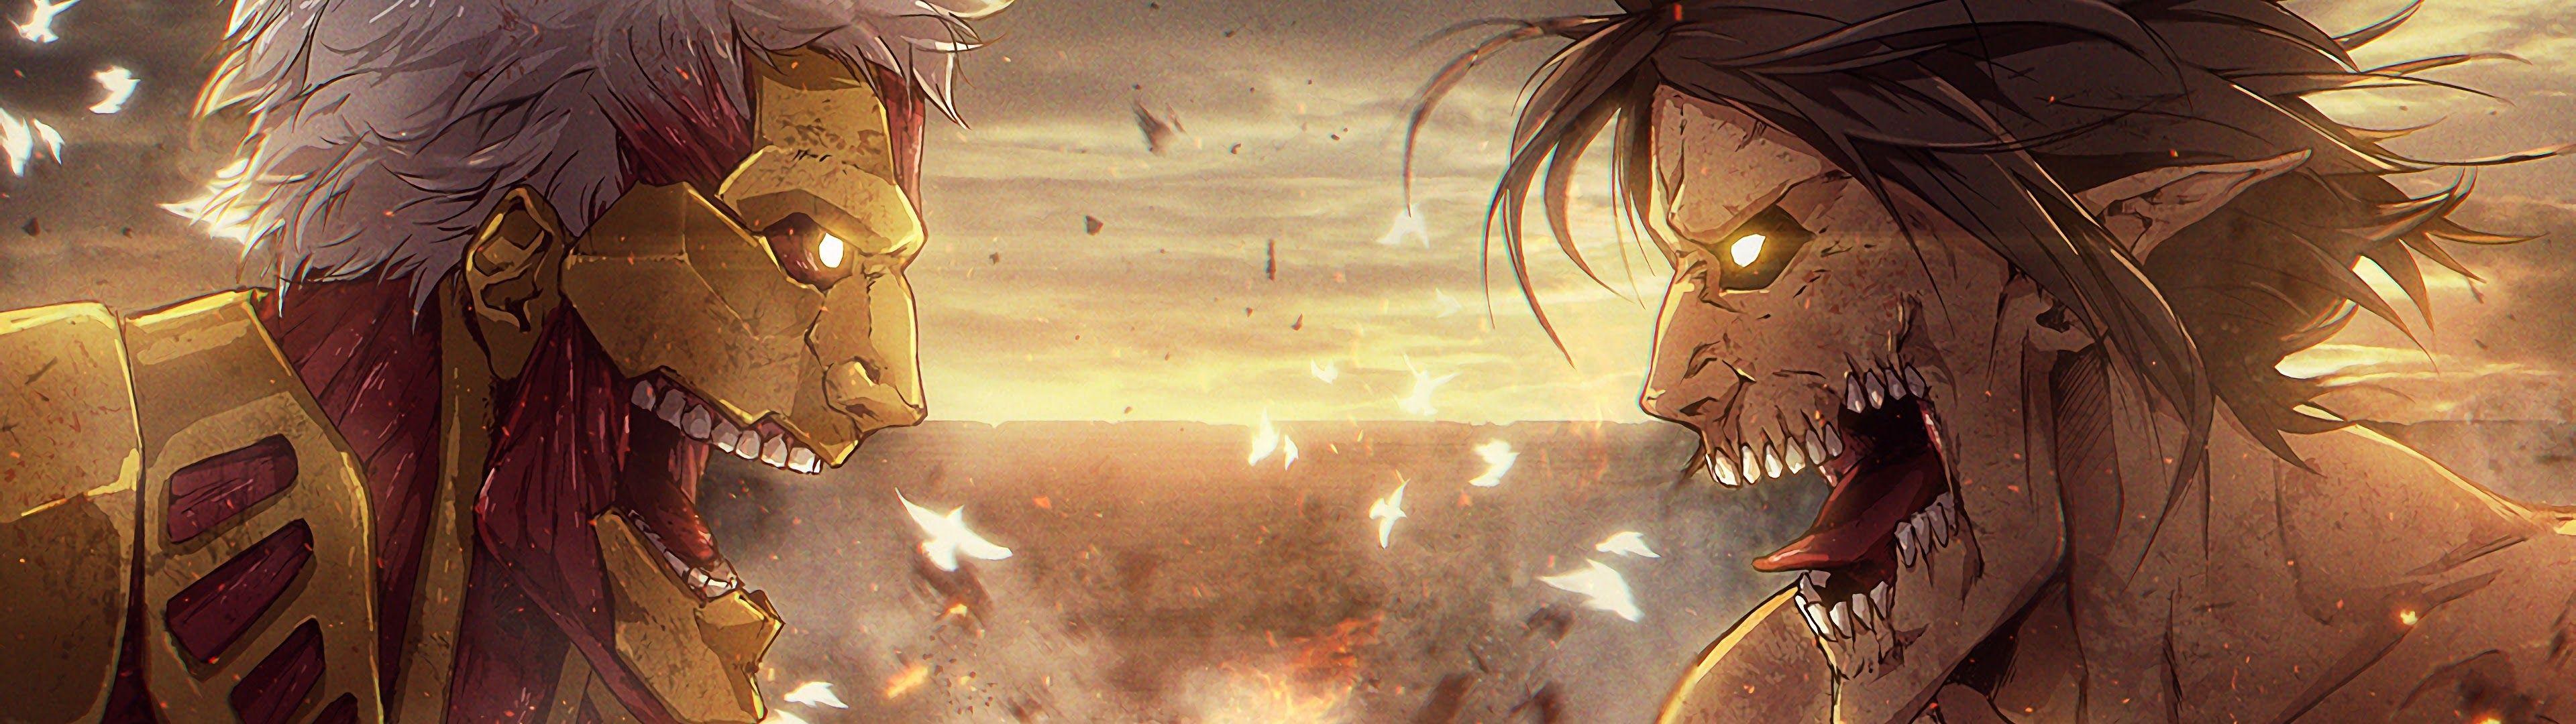 Featured image of post Wallpaper 3840X1080 Attack On Titan Dual Monitor Wallpaper All the pictures are free to set as wallpaper for commercial use please contact original author